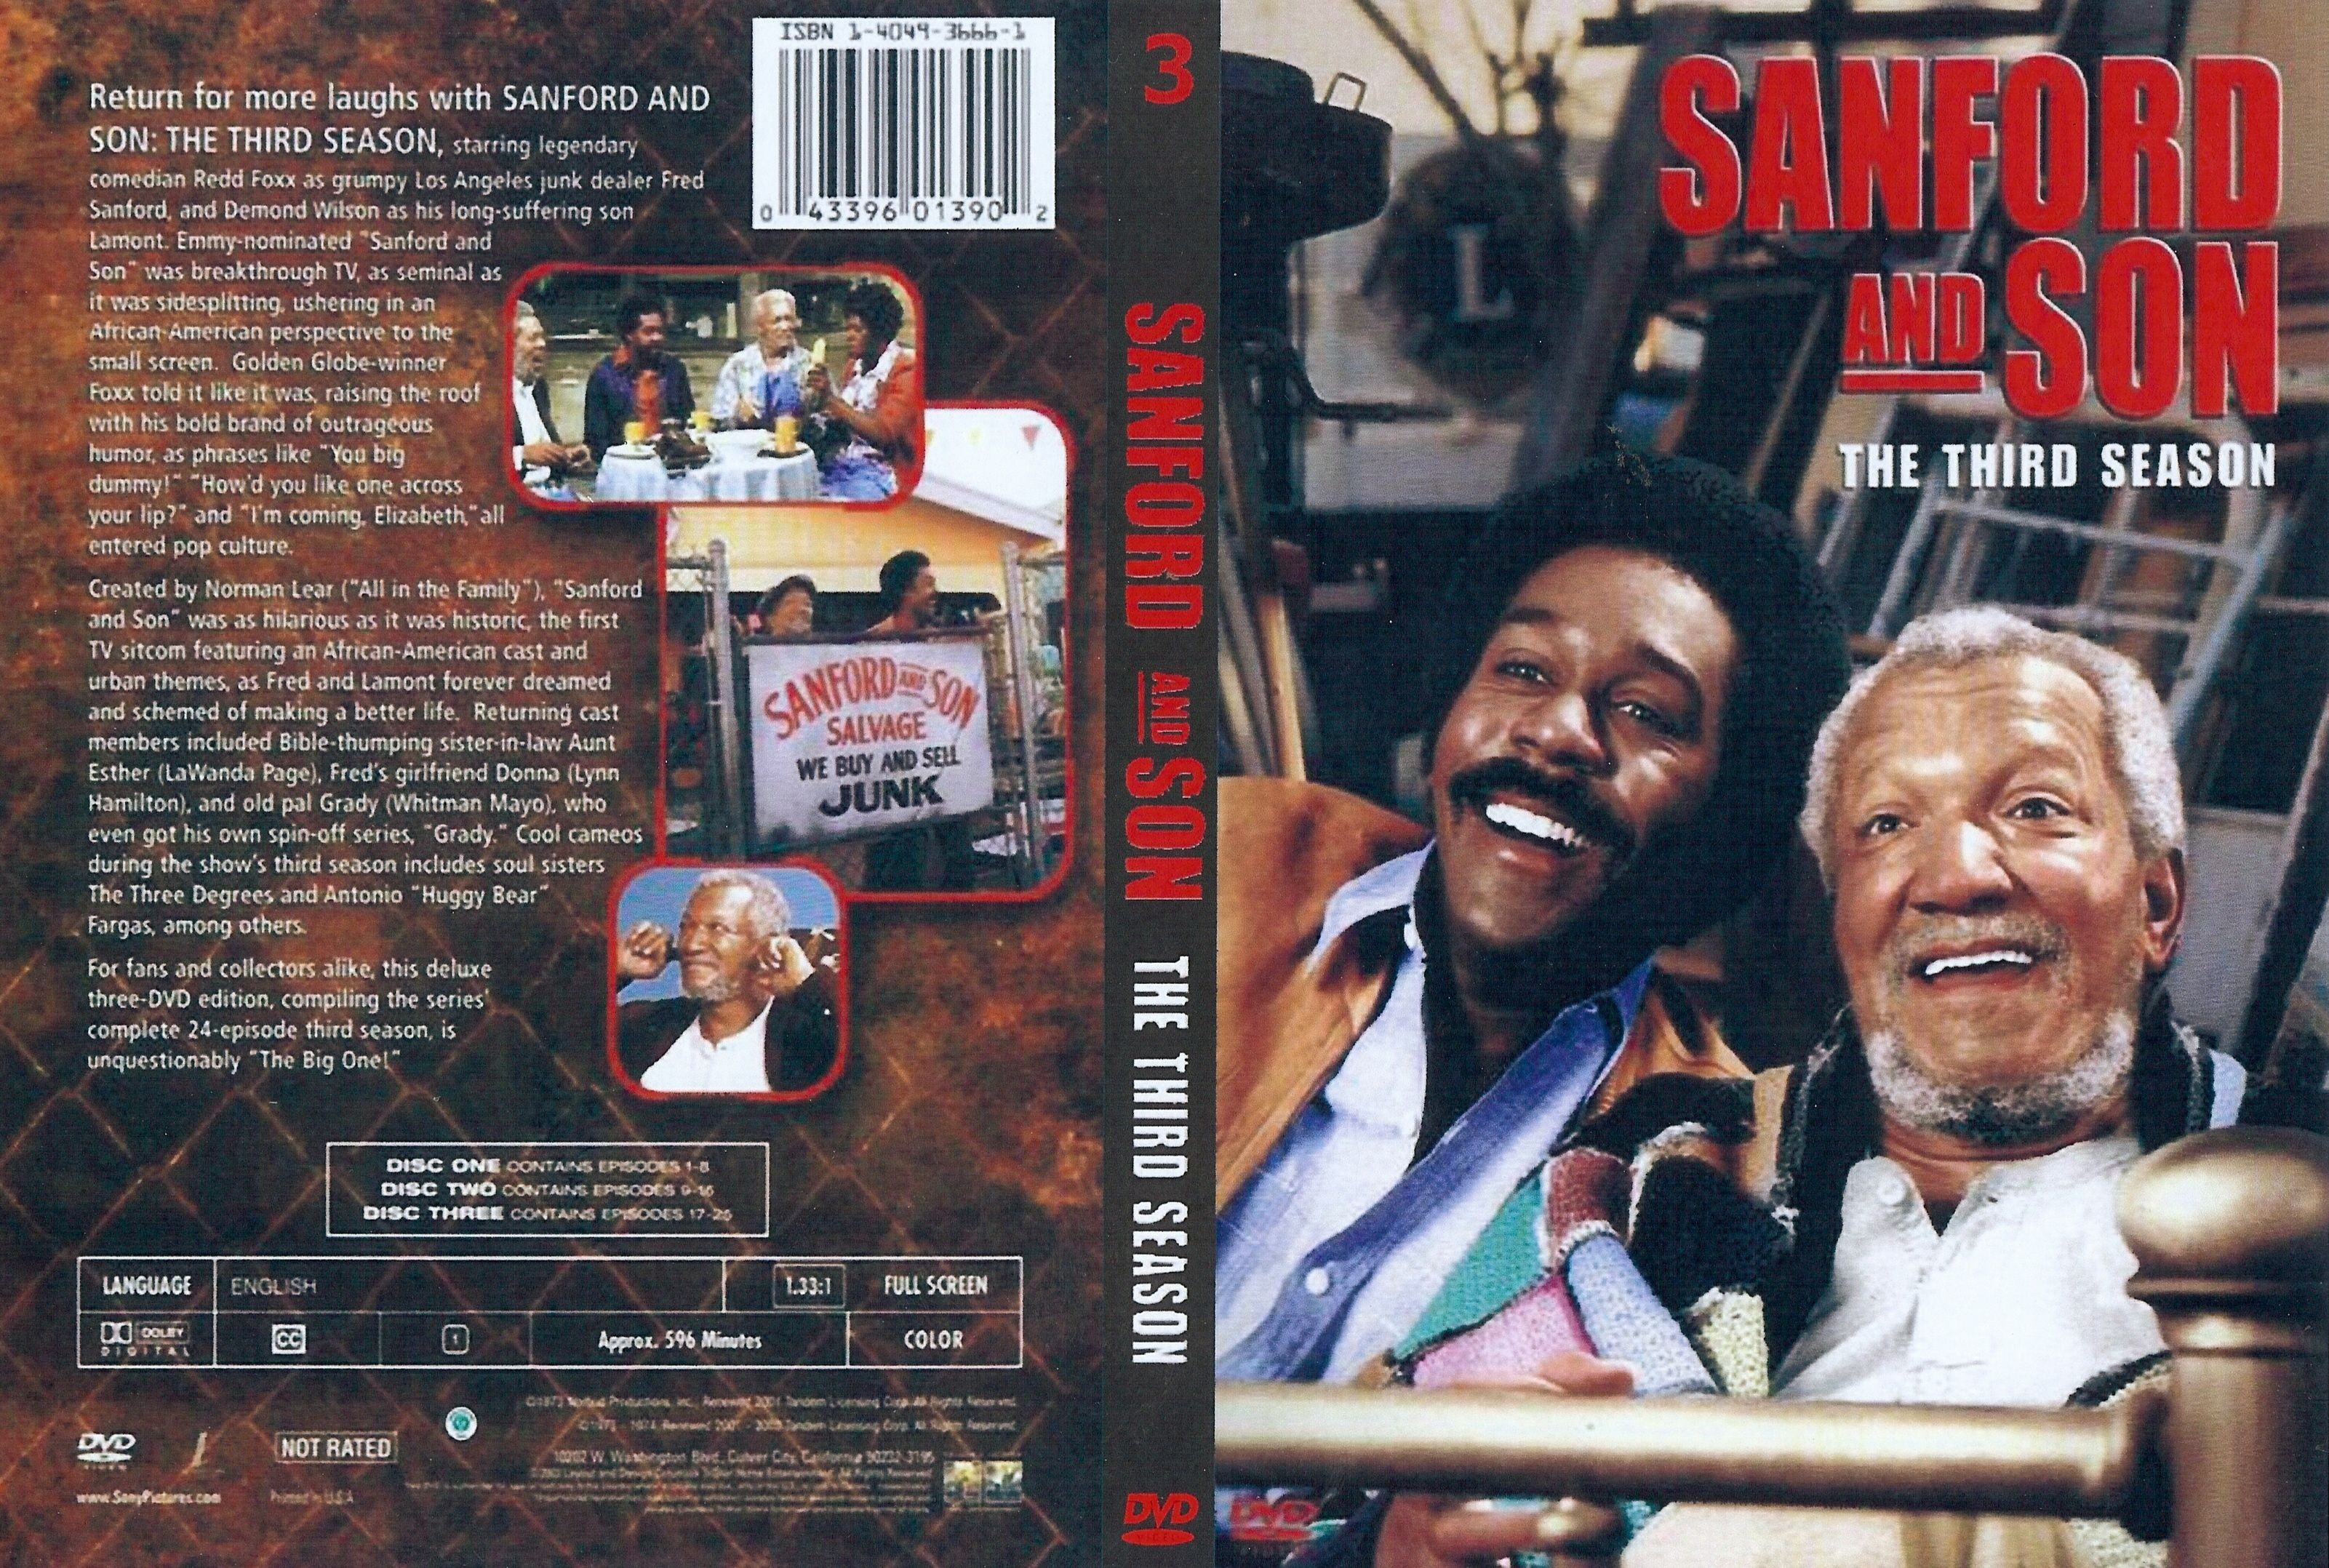 Sanford And Son Images Crazy Gallery 3202x2156.